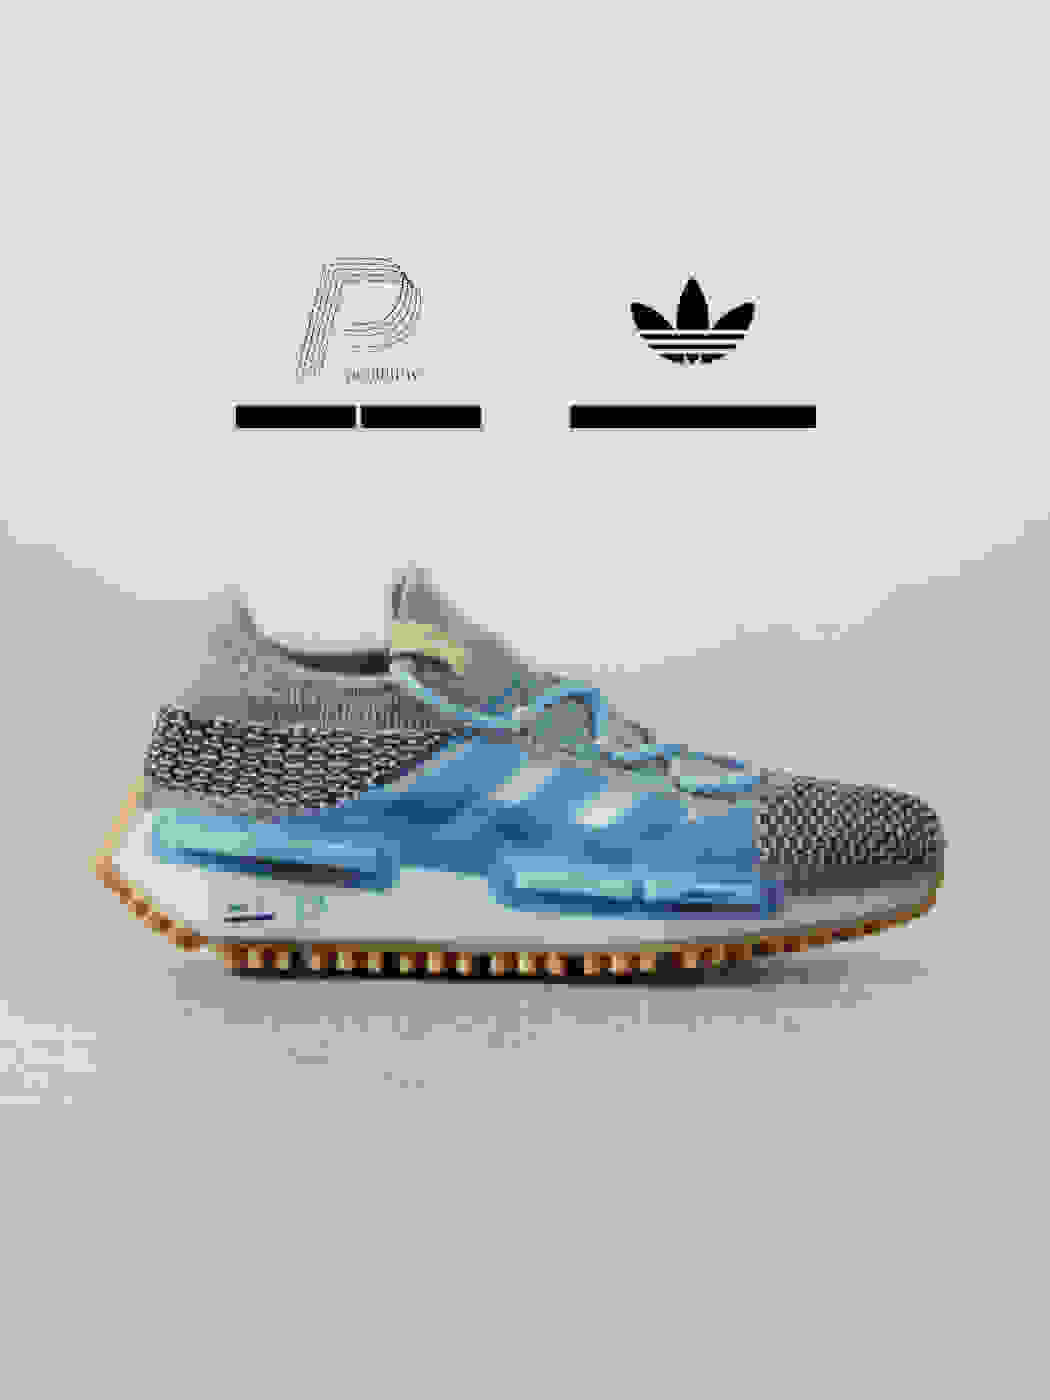 Side view of the shoe, showing the textured knitted upper, blue lace-up and Three Stripes, logo prints on the midsole and a grip outsole.